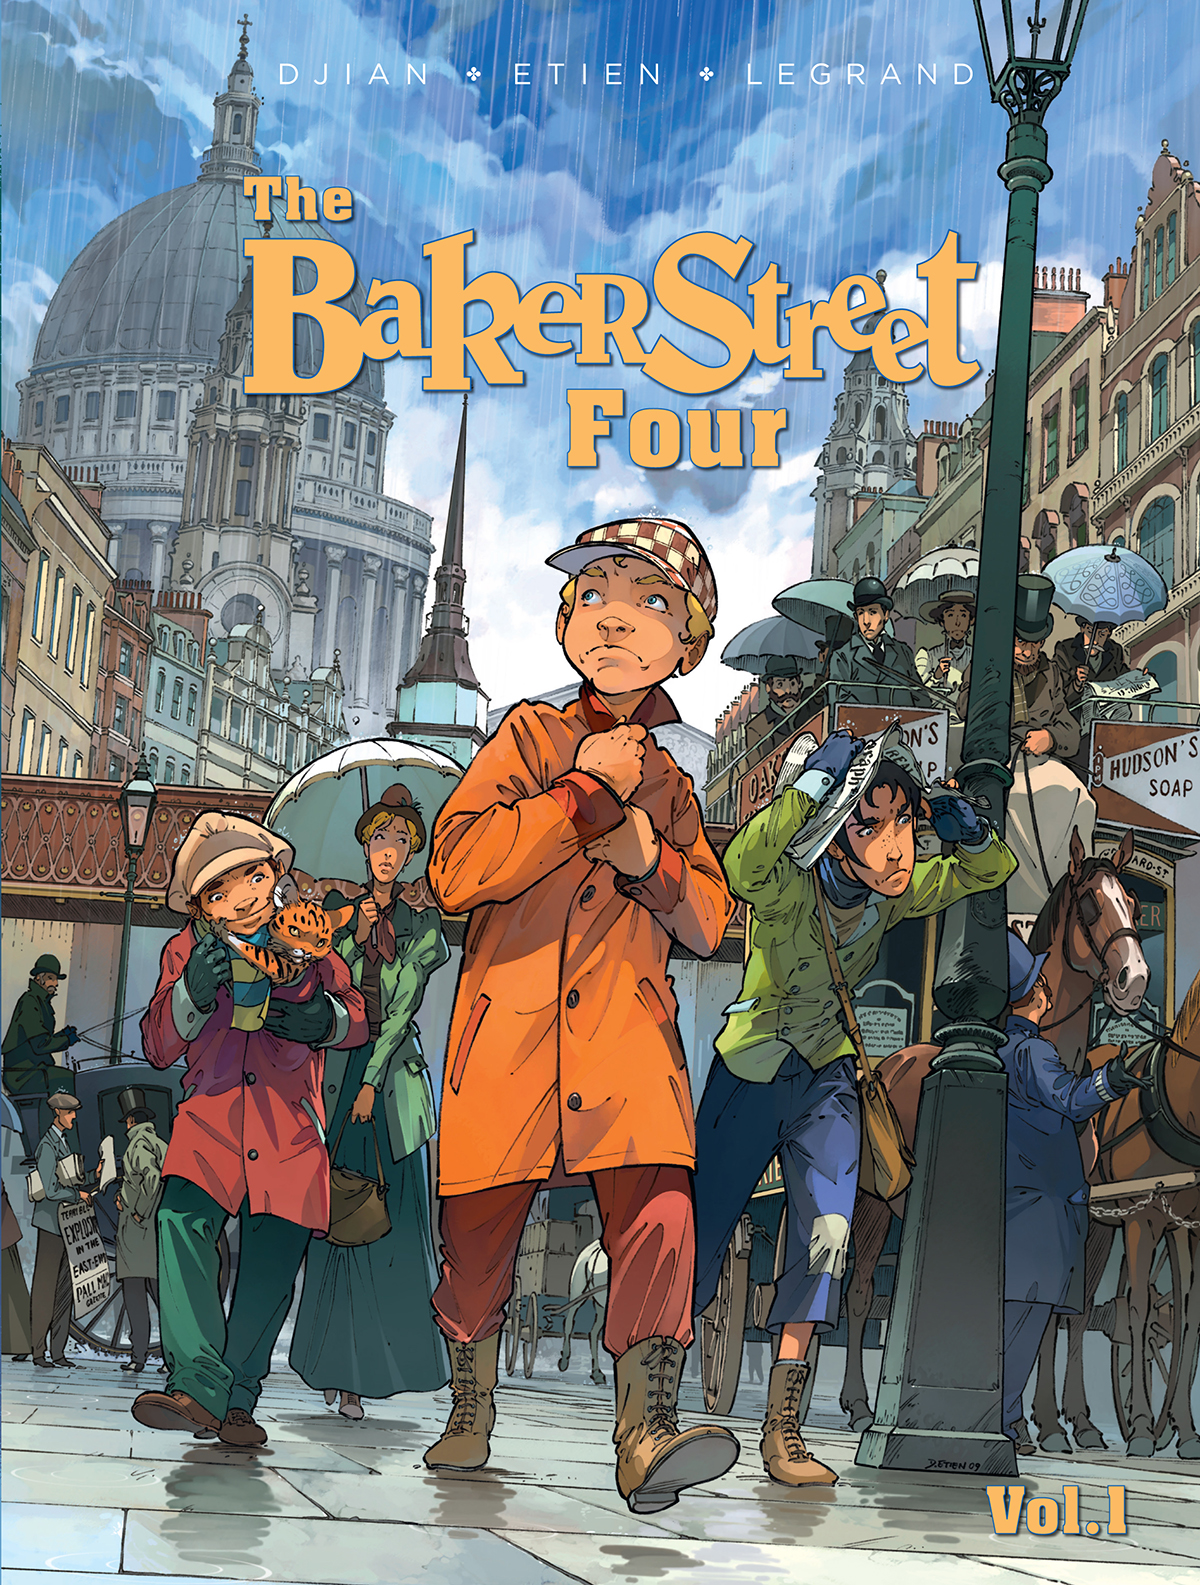 Read the First Chapter of The Baker Street Four by Olivier Legrand, J.B. Dijan & David ...1200 x 1585